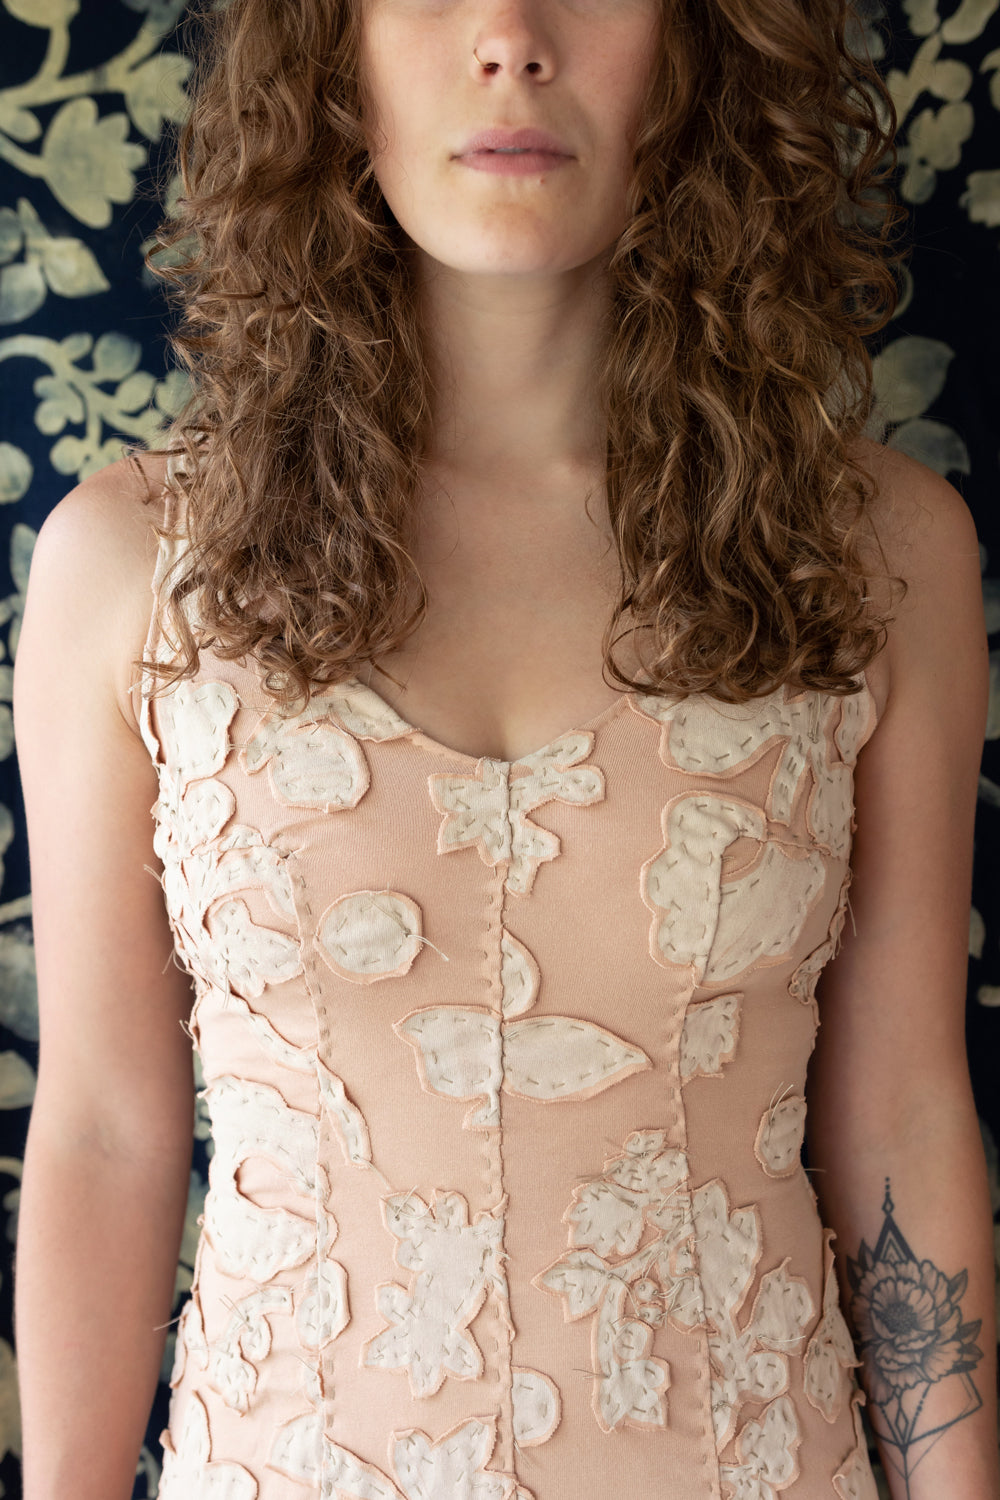 Model wearing the Carrington Dress with hand-sewn seams and floral appliqué. Shown in vetiver pink color.